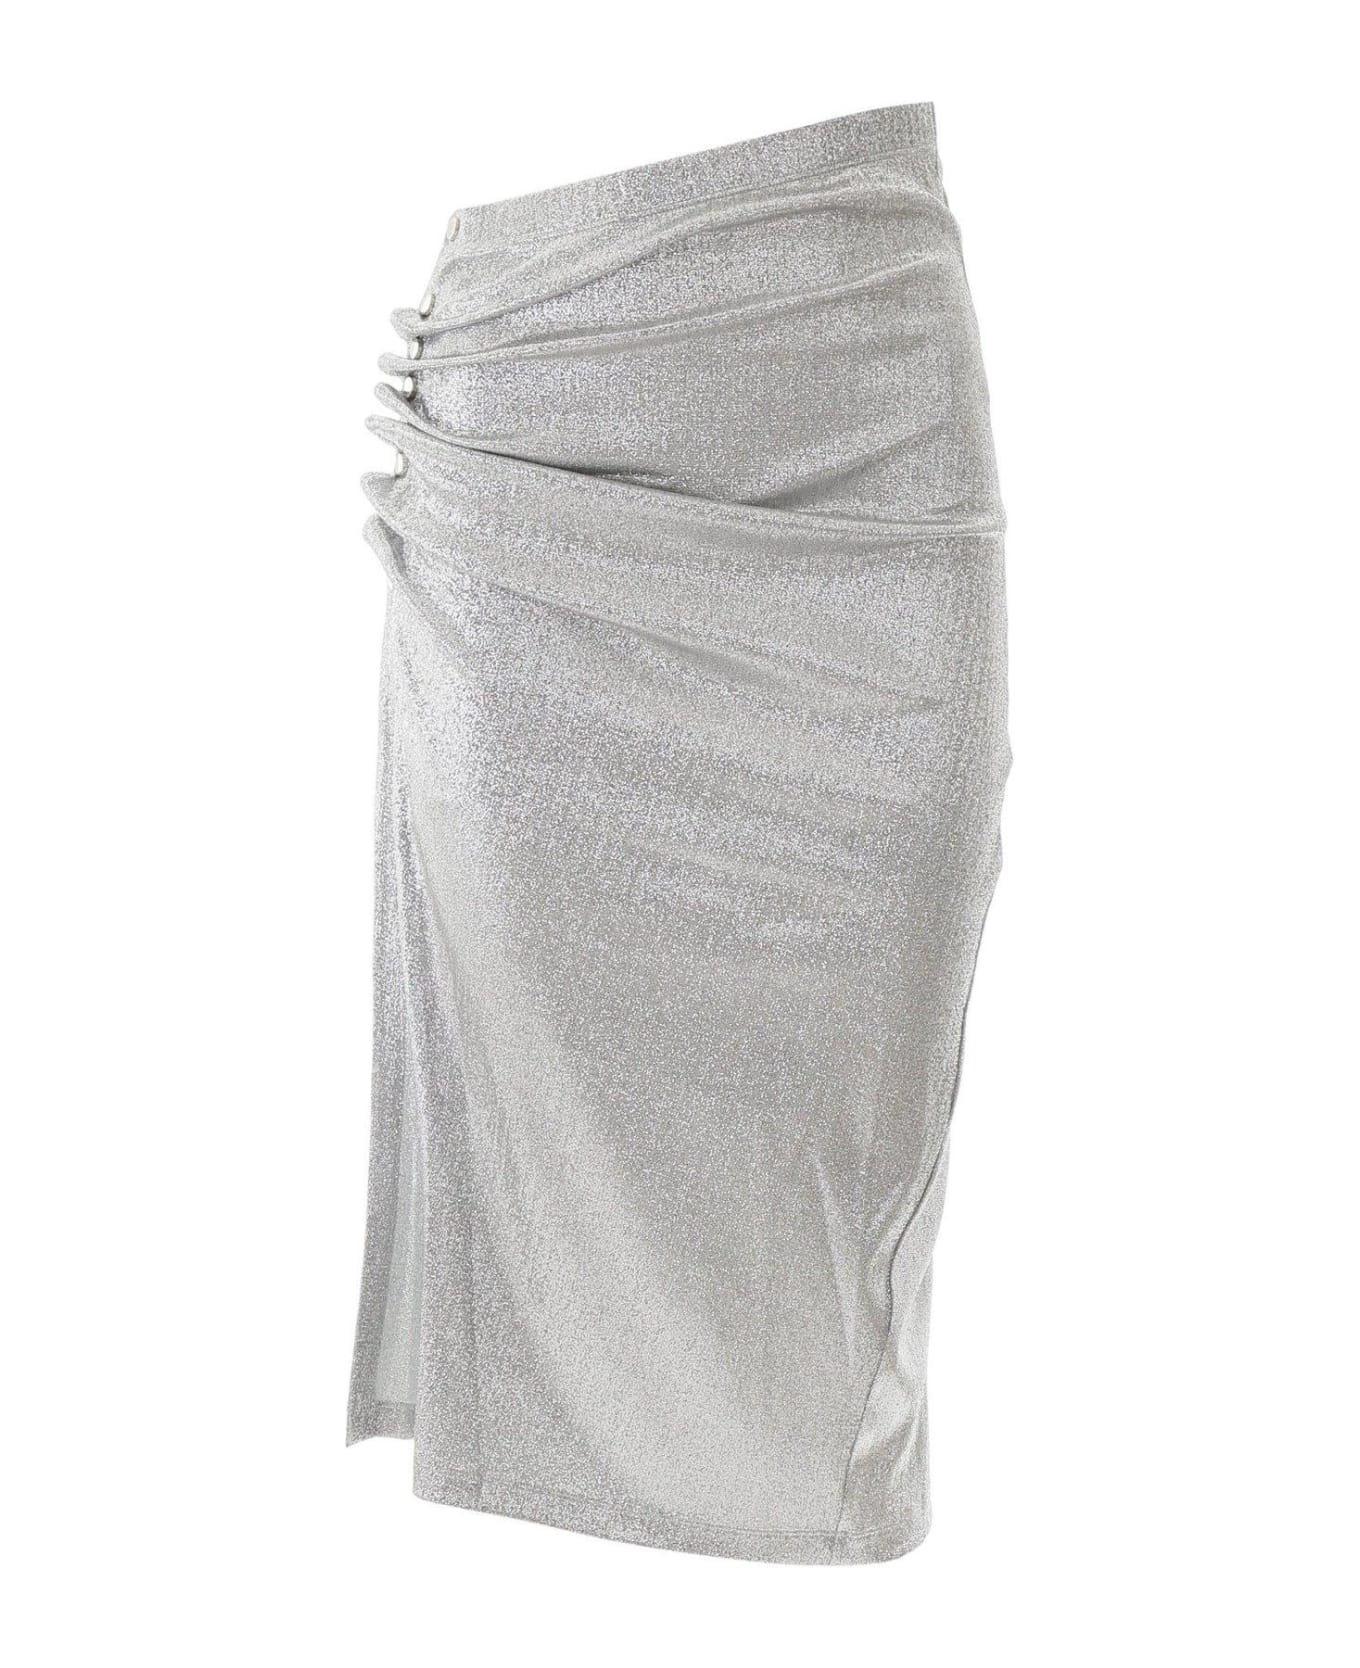 Paco Rabanne Drapped Button Skirt - Silver スカート